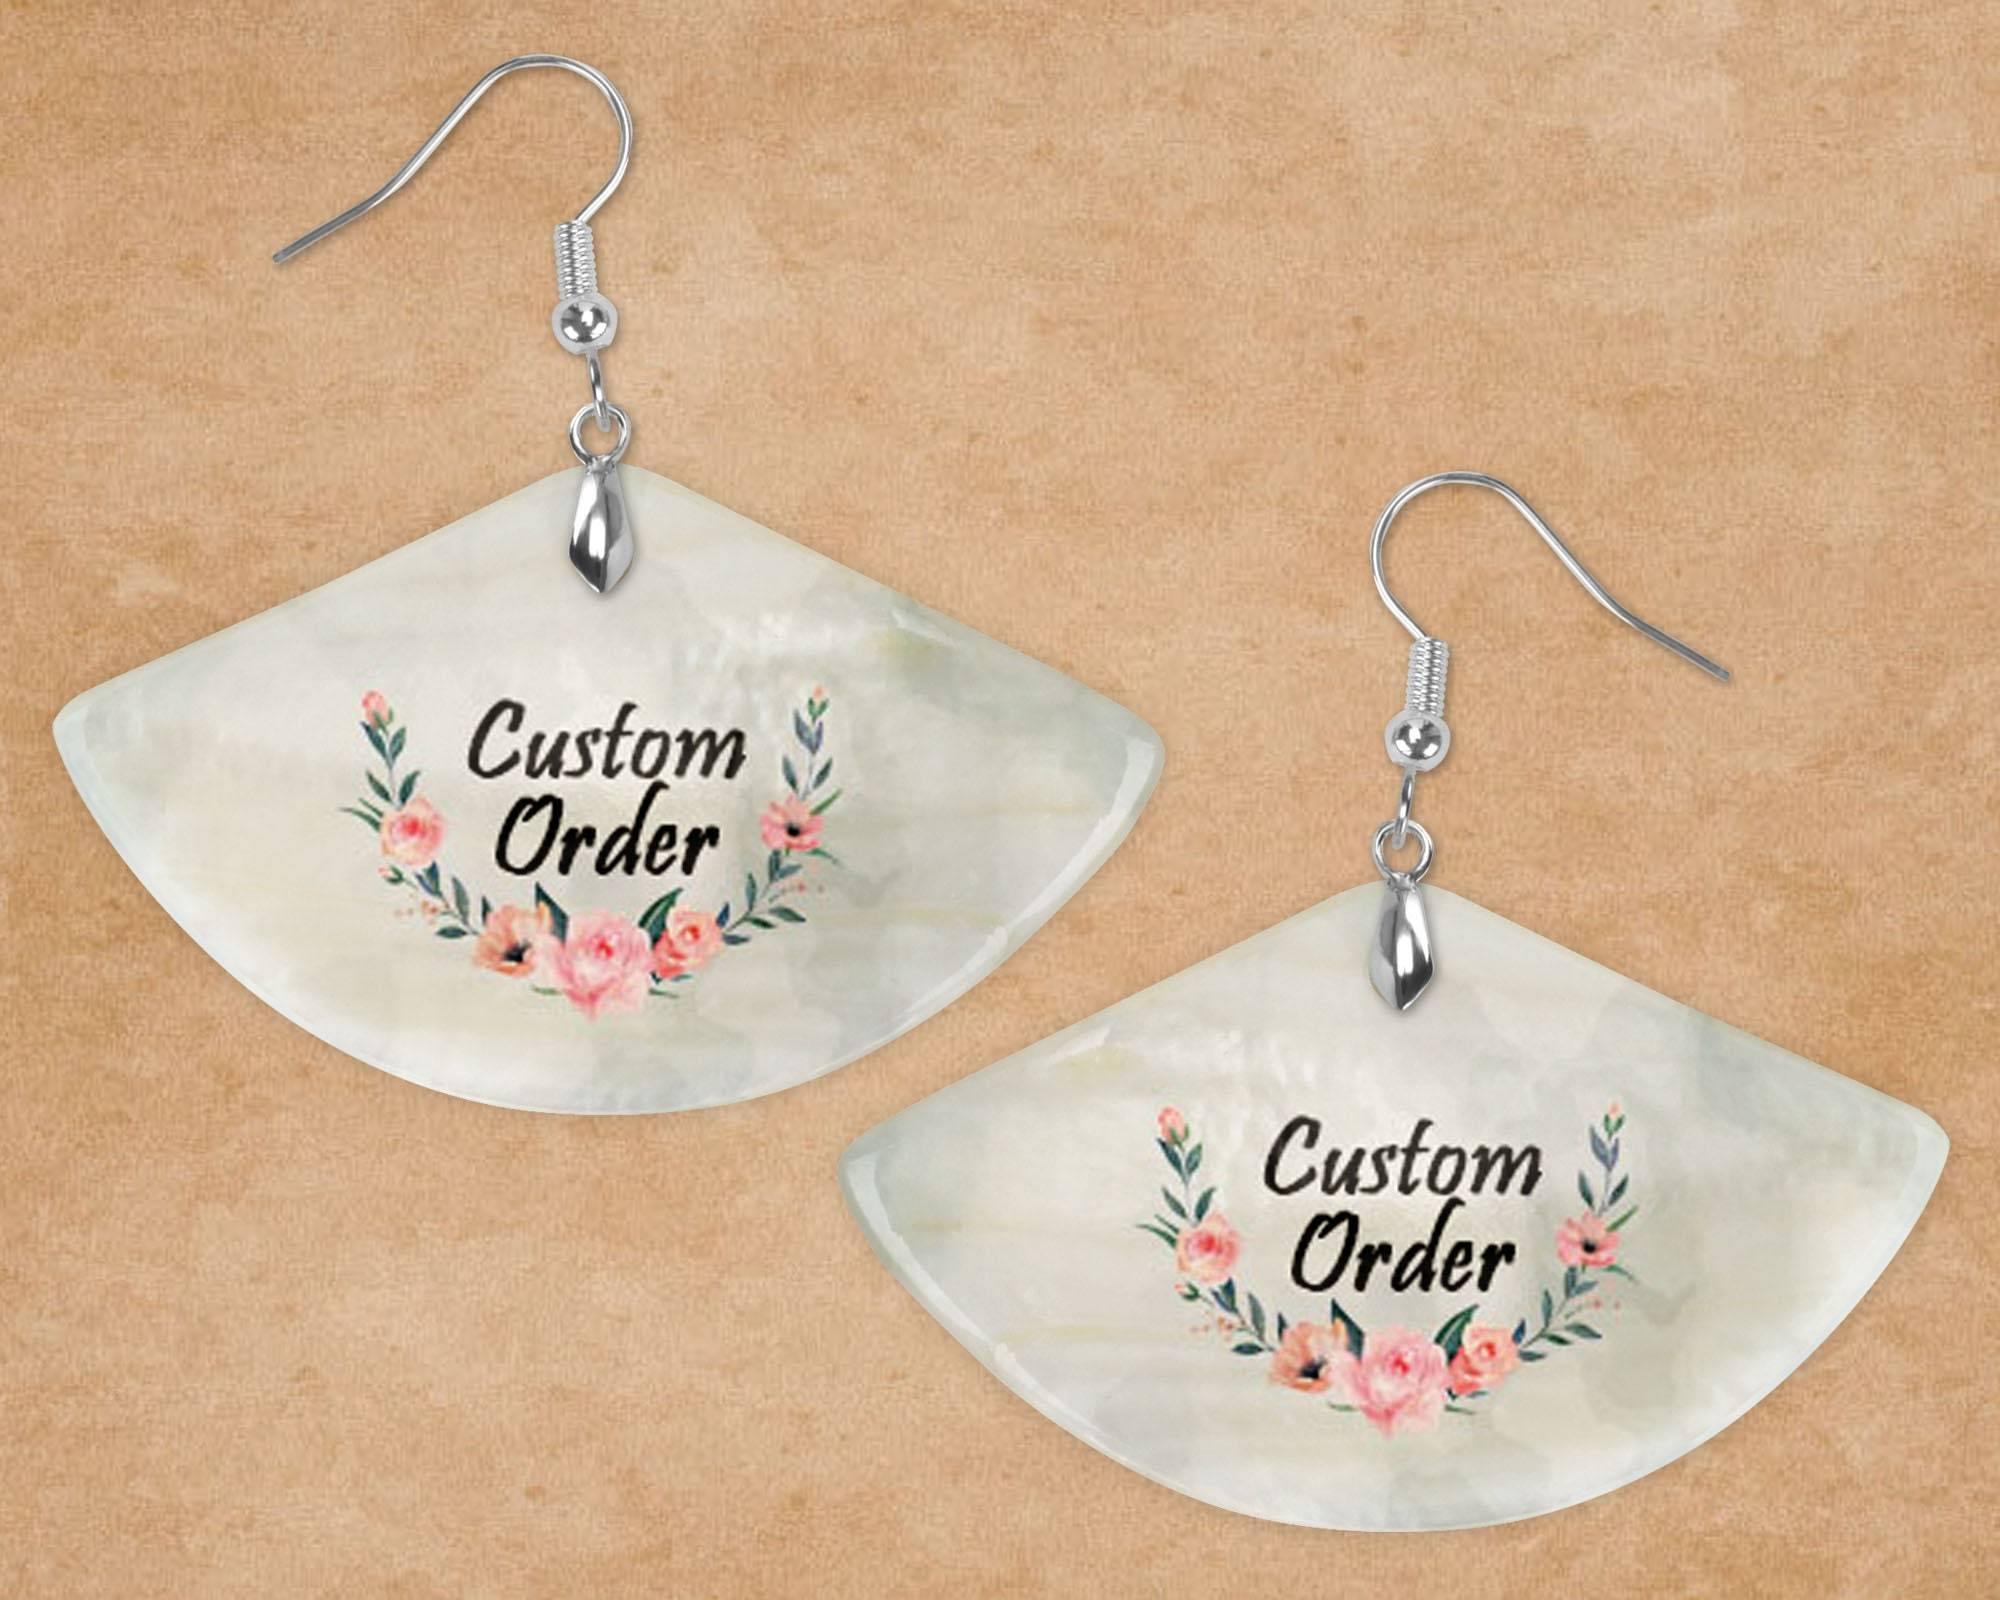 Custom Jewelry | Personalized Jewelry | Shell Pendant Earrings | Custom Order - This & That Solutions - Custom Jewelry | Personalized Jewelry | Shell Pendant Earrings | Custom Order - Personalized Gifts & Custom Home Decor